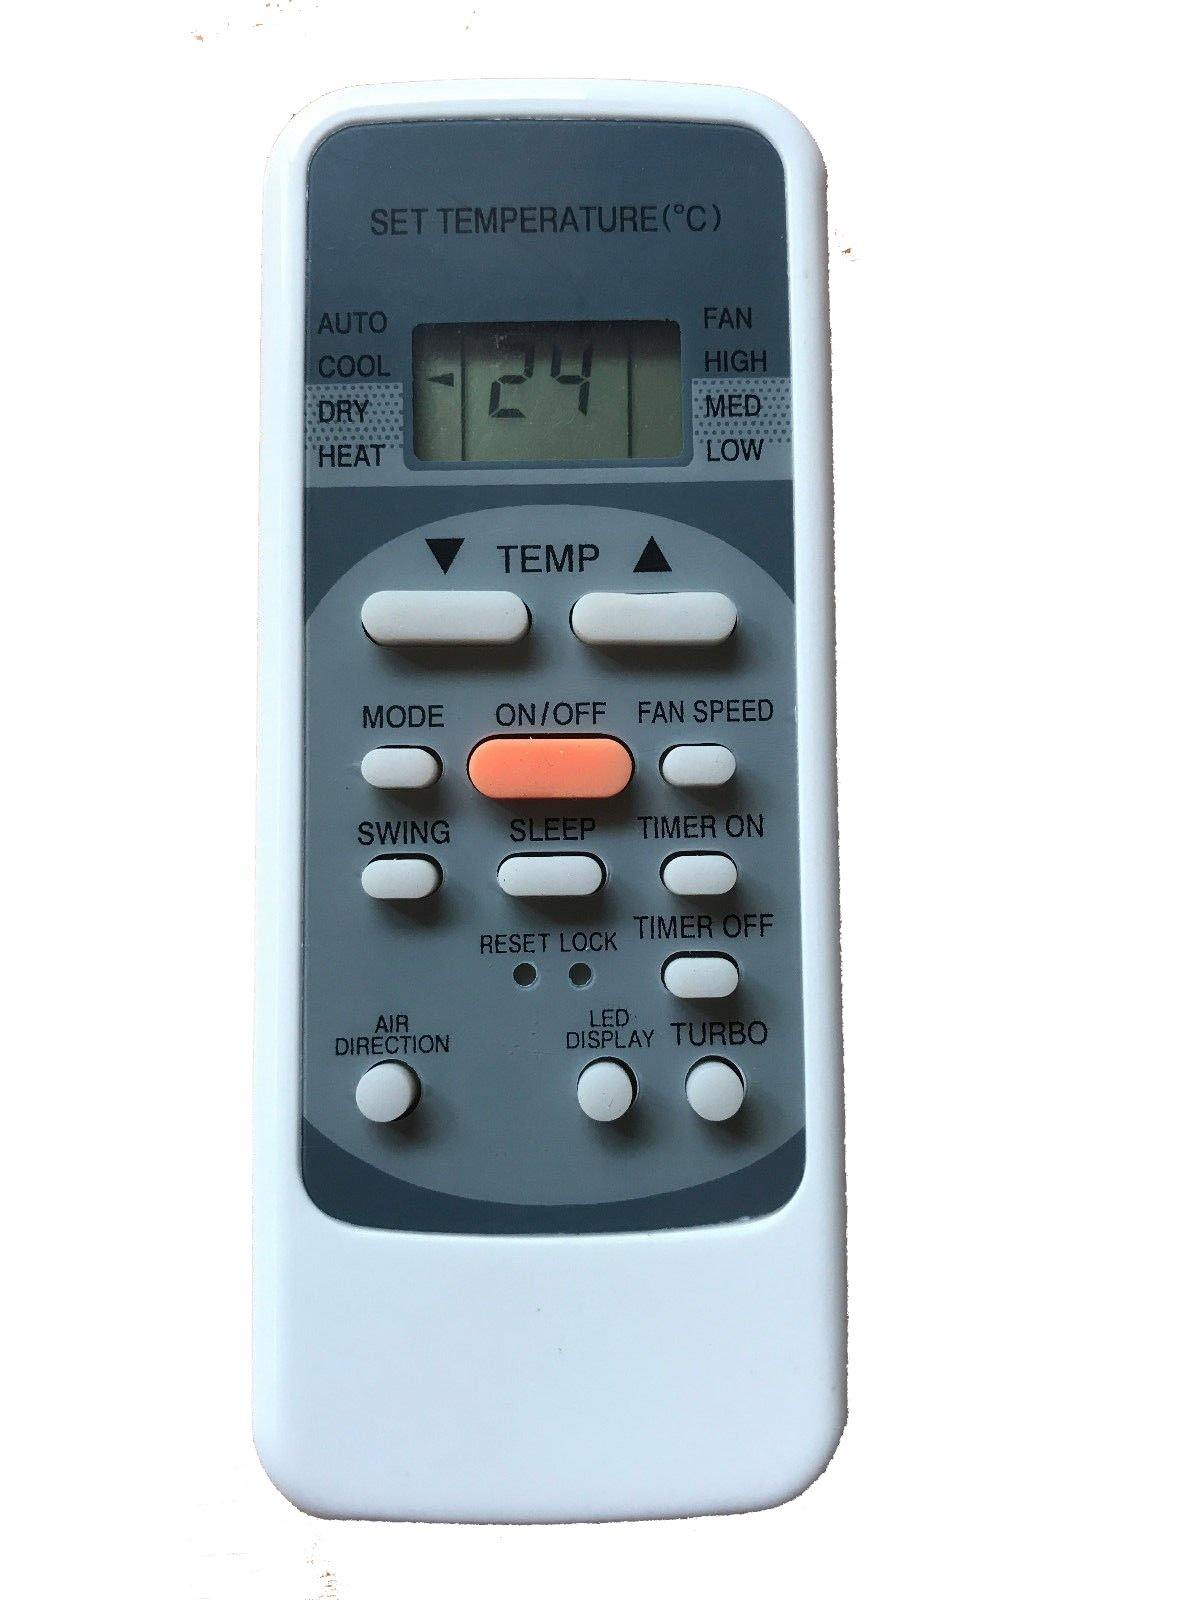 Air Conditioner Remote For Lennox Model: R5 - China Air Conditioner Remotes :: Cheapest AC Remote Solutions